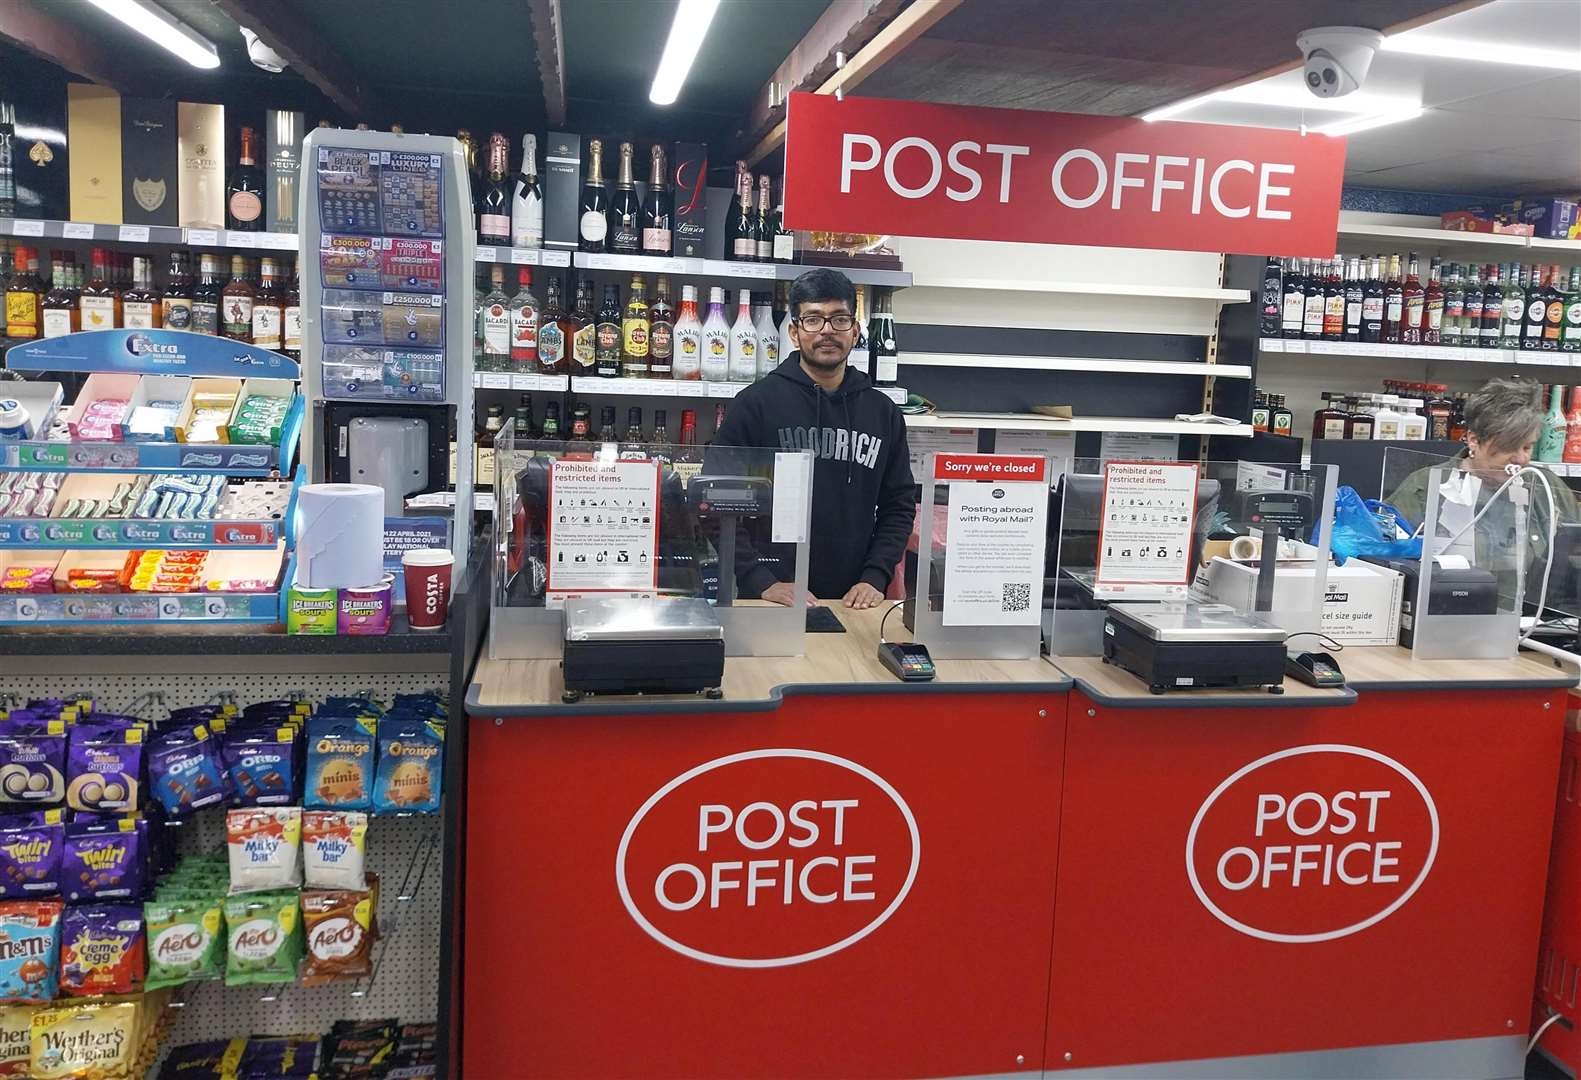 The Post Office now has a permanent home at the Costcutter in Edenbridge with postmaster Rathivarman Soundararasha